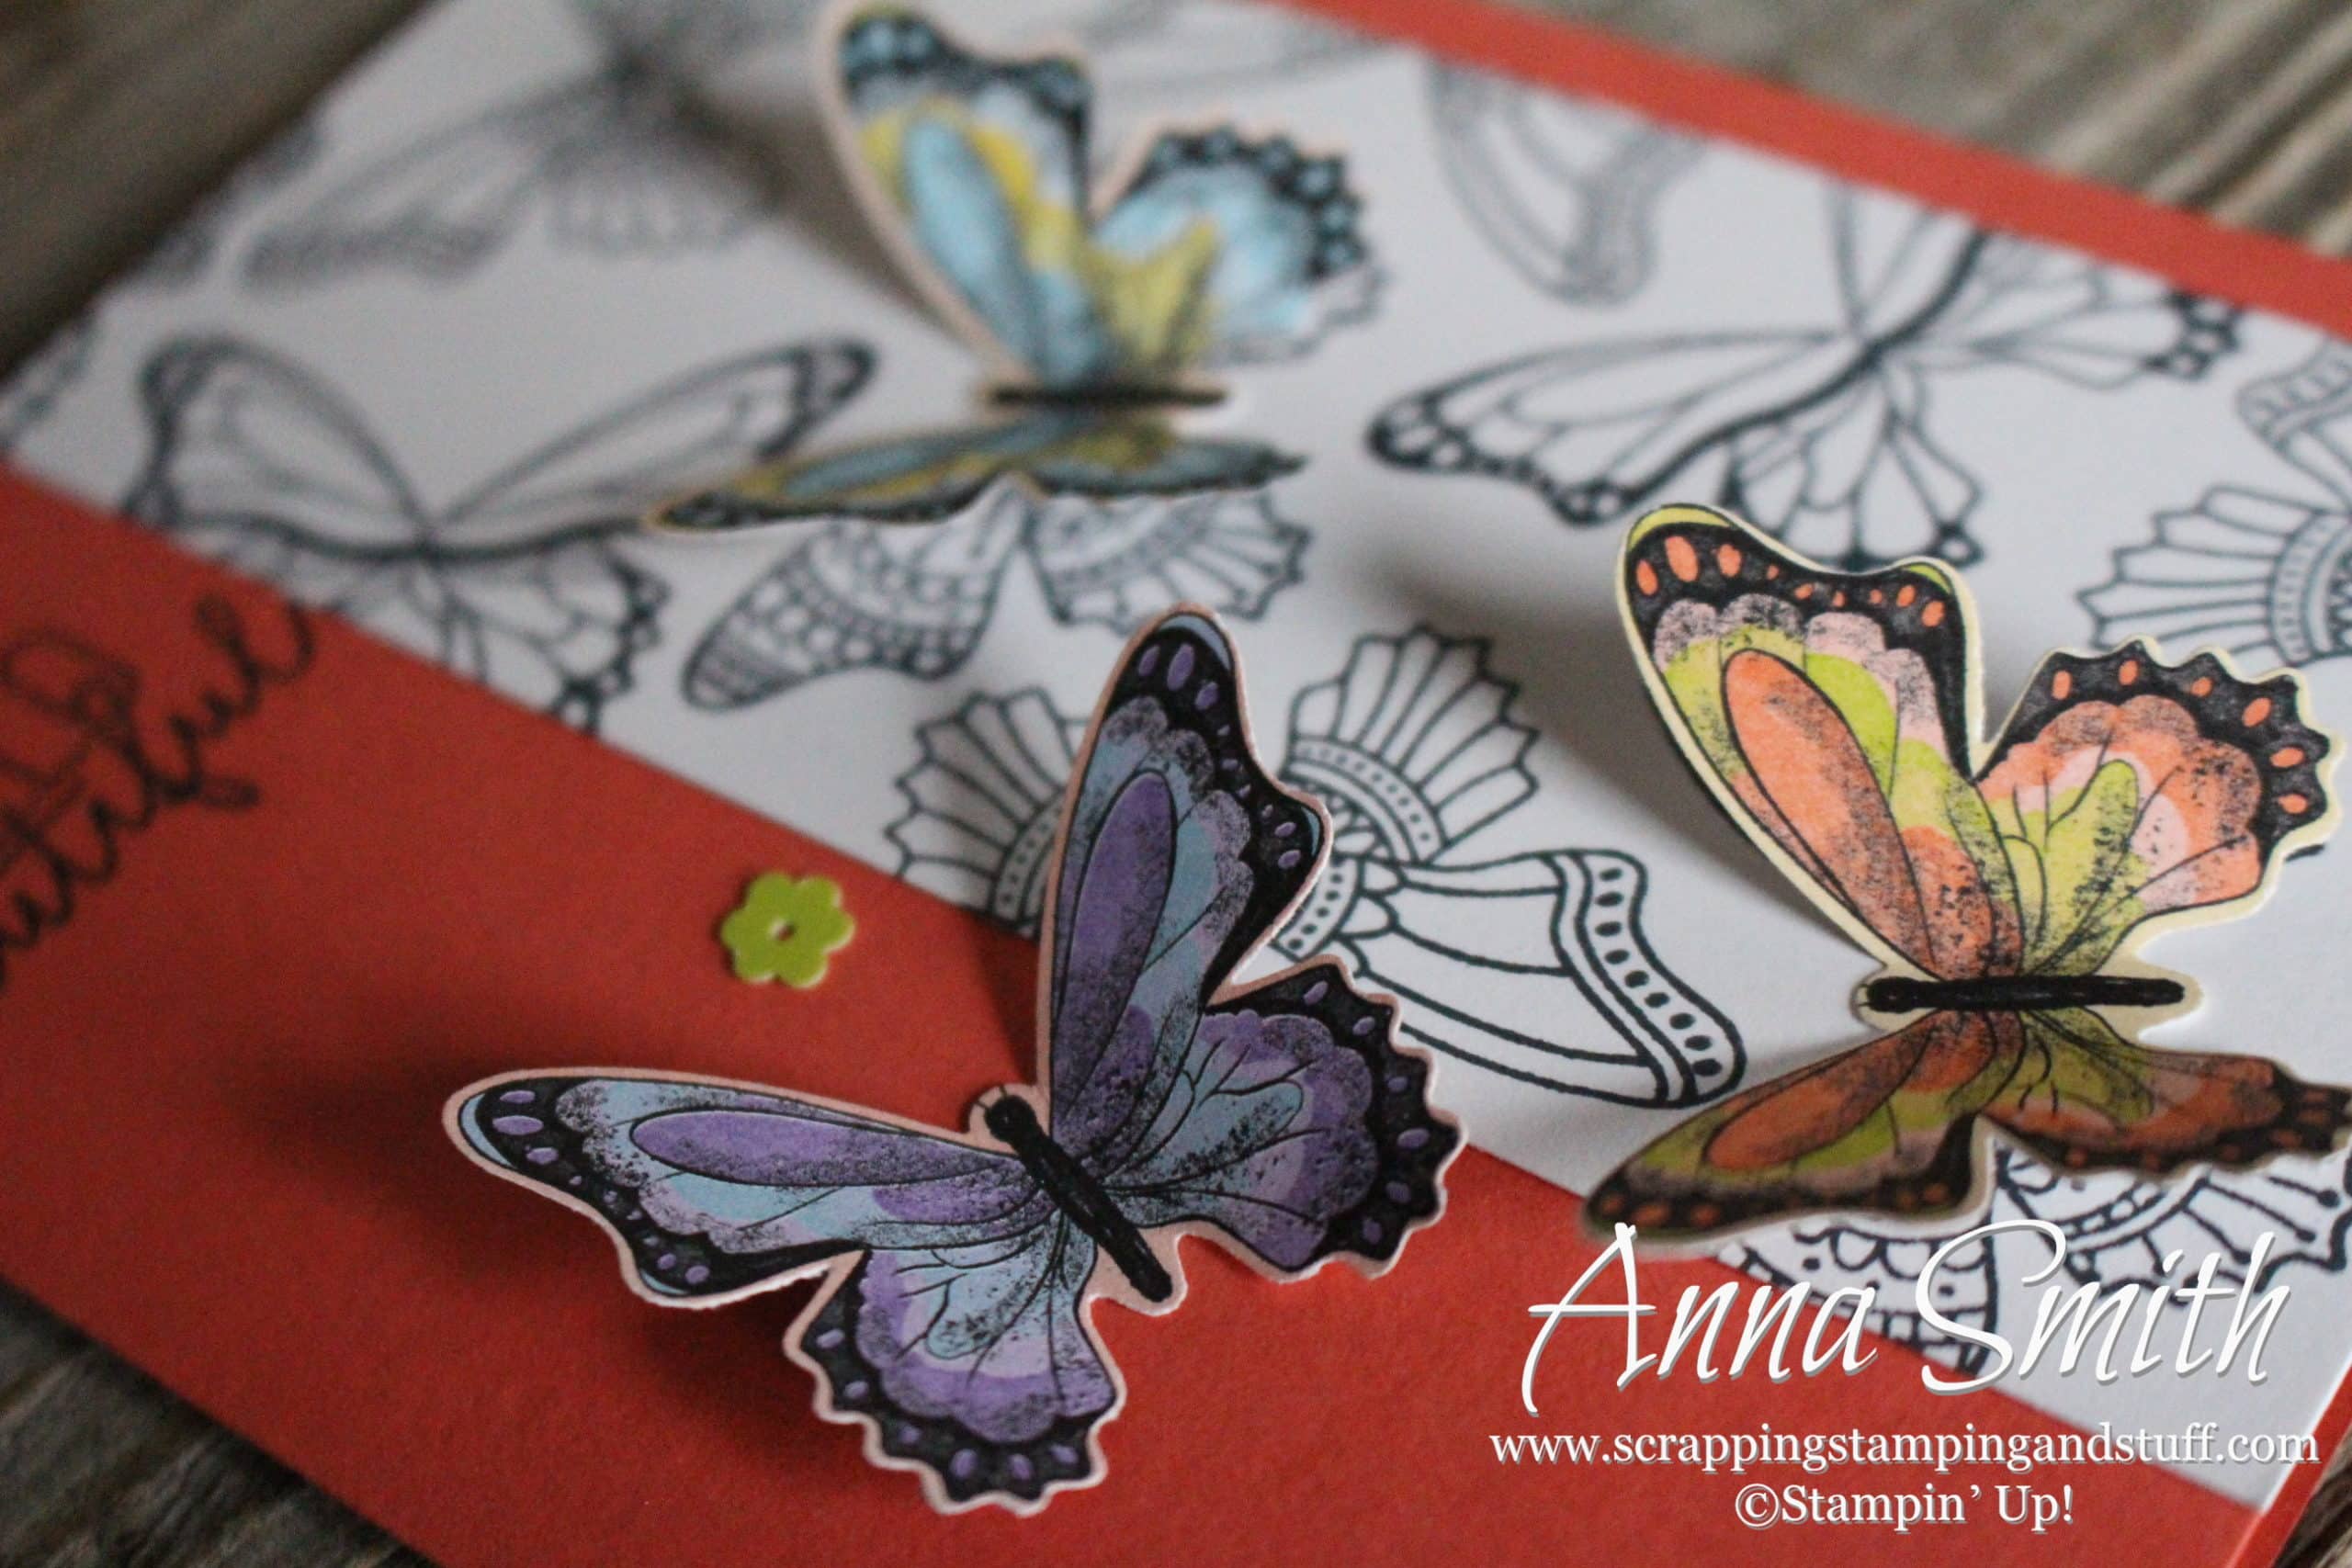 12 Days of Sneak Peeks – Featuring Stampin’ Up! Butterfly Gala